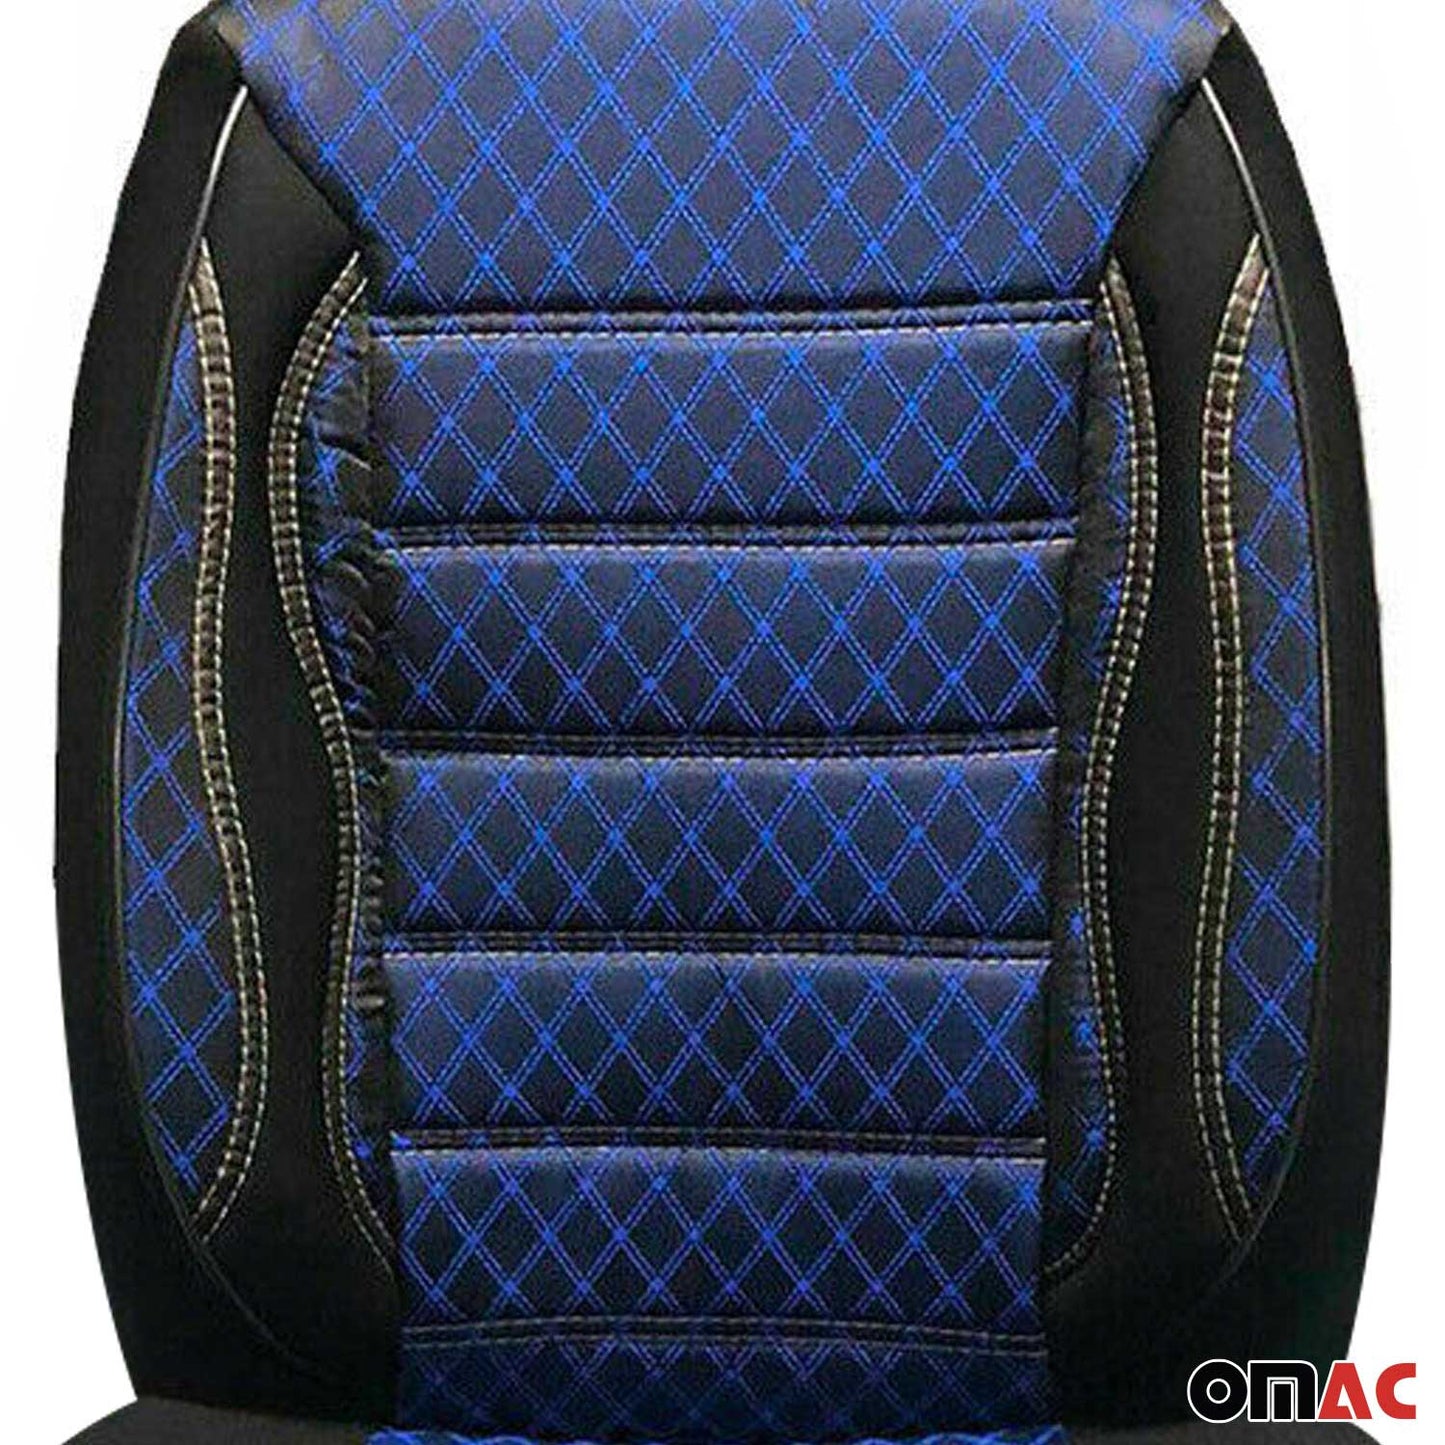 OMAC Front Car Seat Covers for Mercedes Sprinter W906 W907 2006-2024 Black & Blue 2+1 A011856